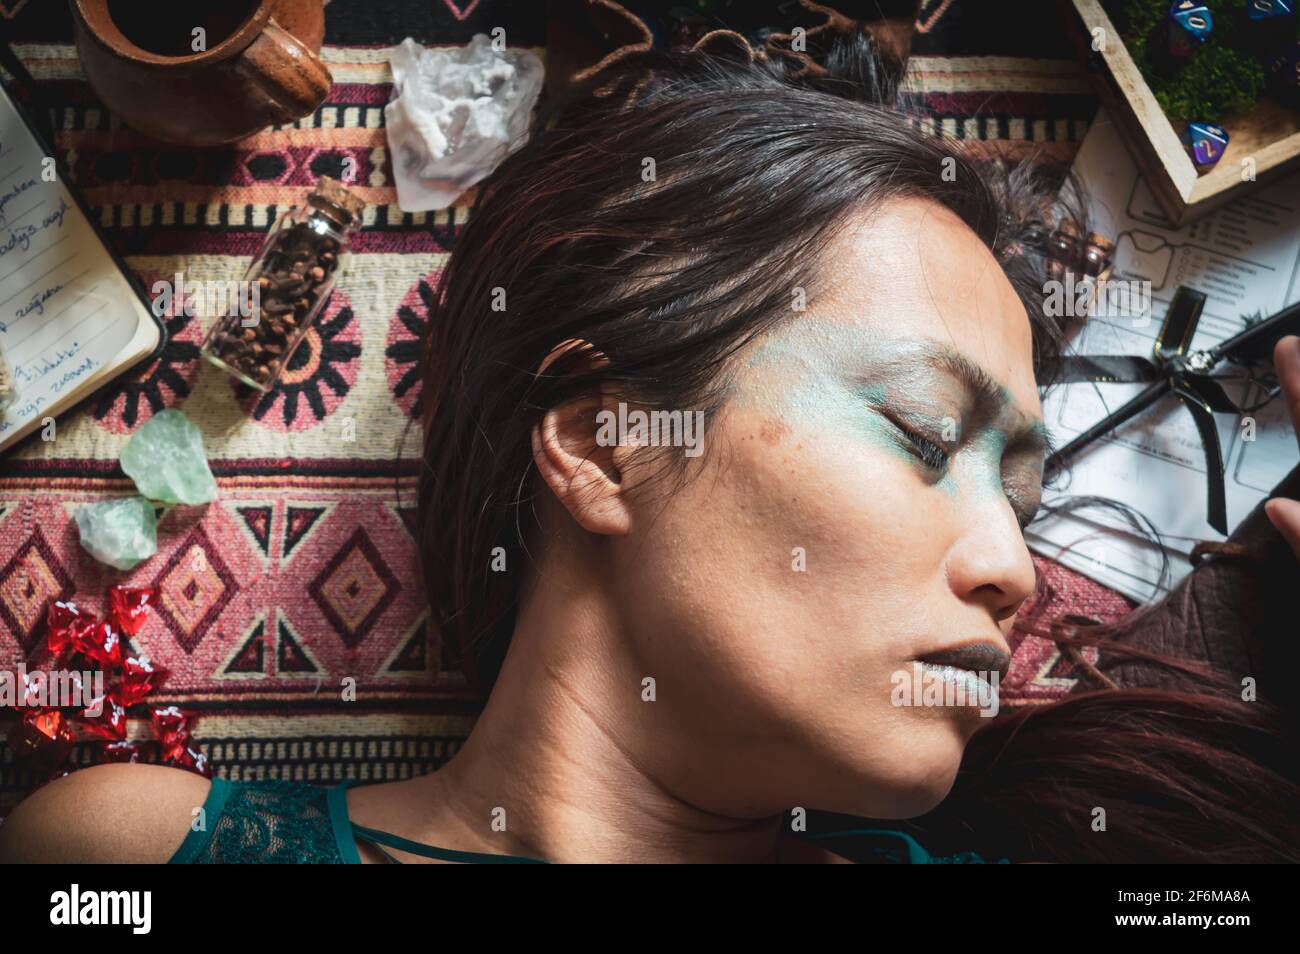 Portrait of a sleeping Indonesian woman surrounded by role-playing game attributes like dice, crystals pen and paper and, notebooks. Vintage edit. Stock Photo